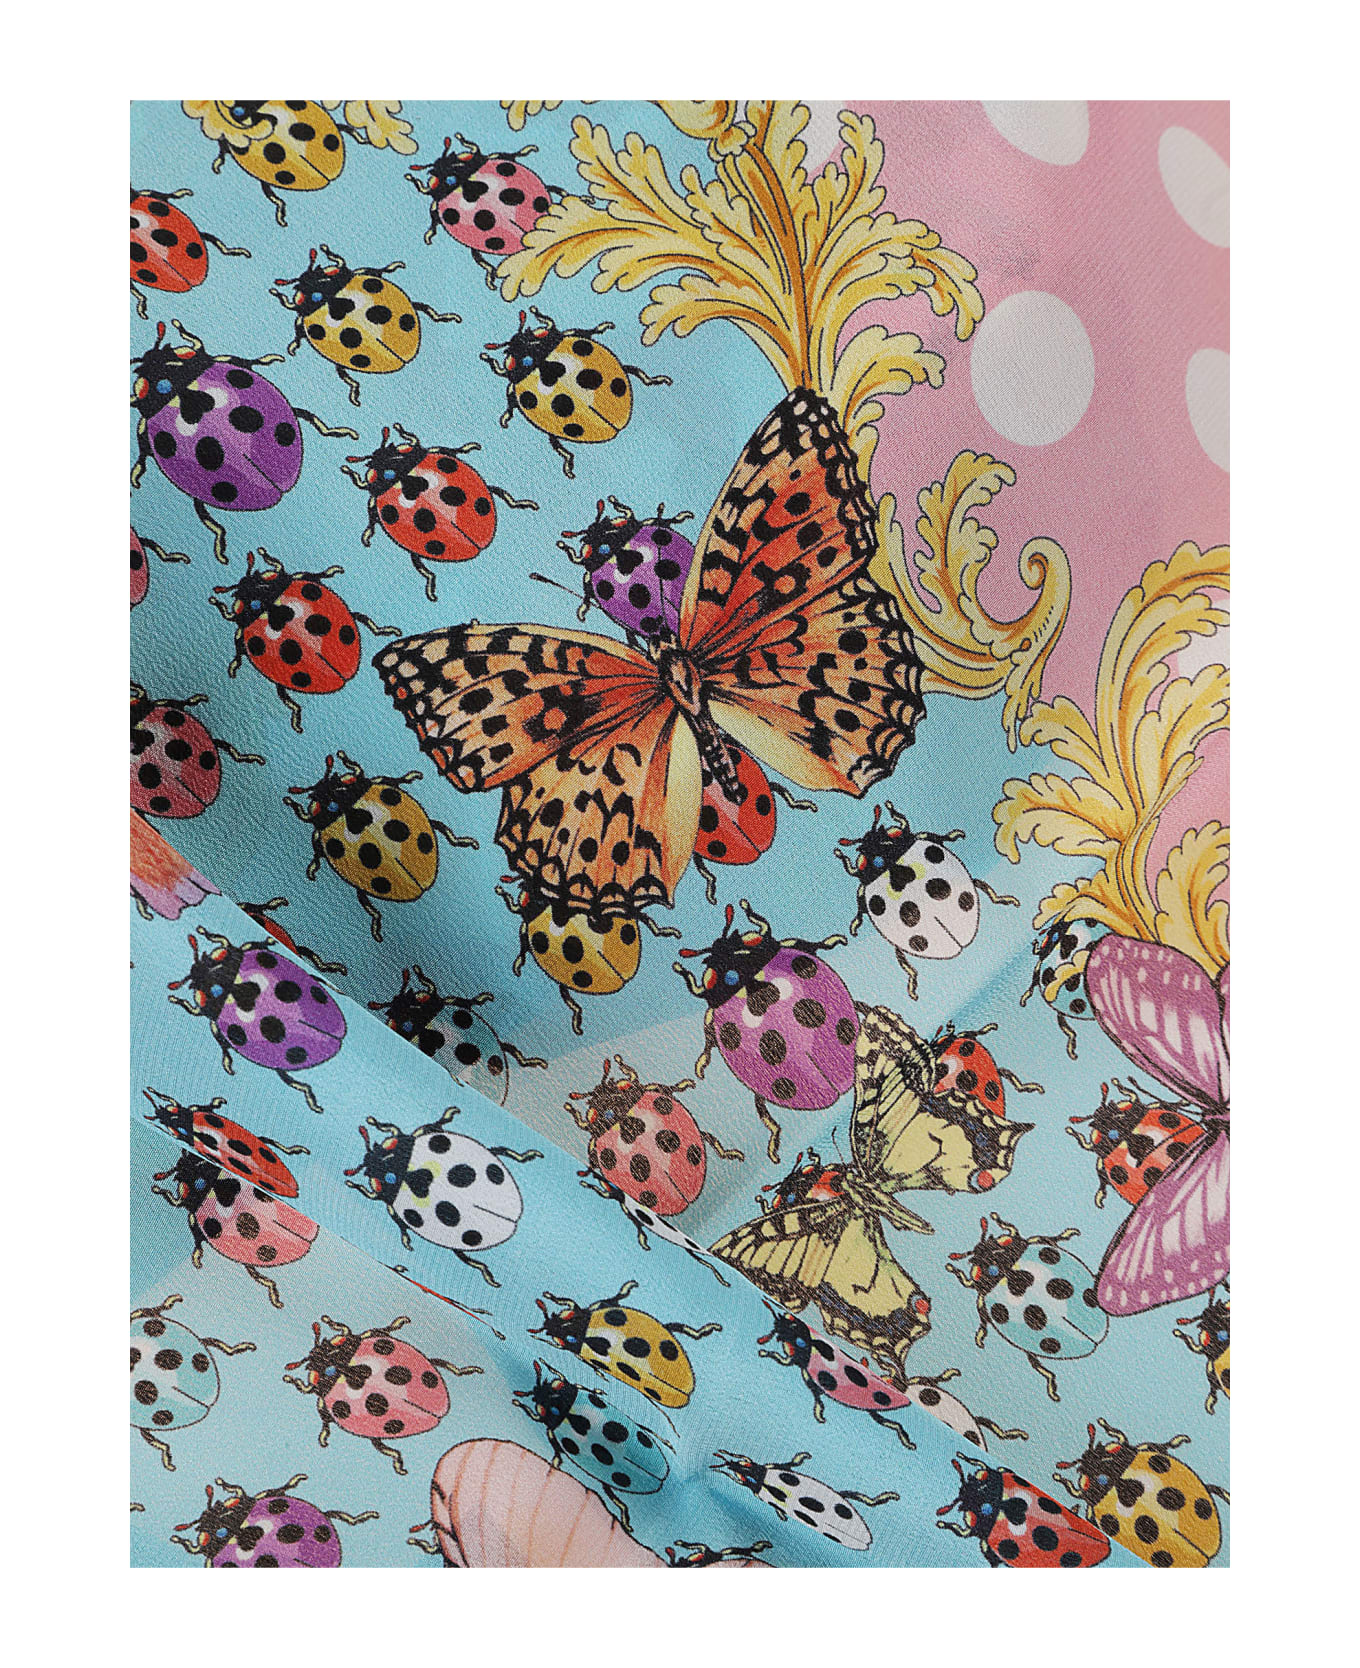 Versace Polka Dot Lady Bug & Butterfly Printed Scarf - Multicolor スカーフ＆ストール